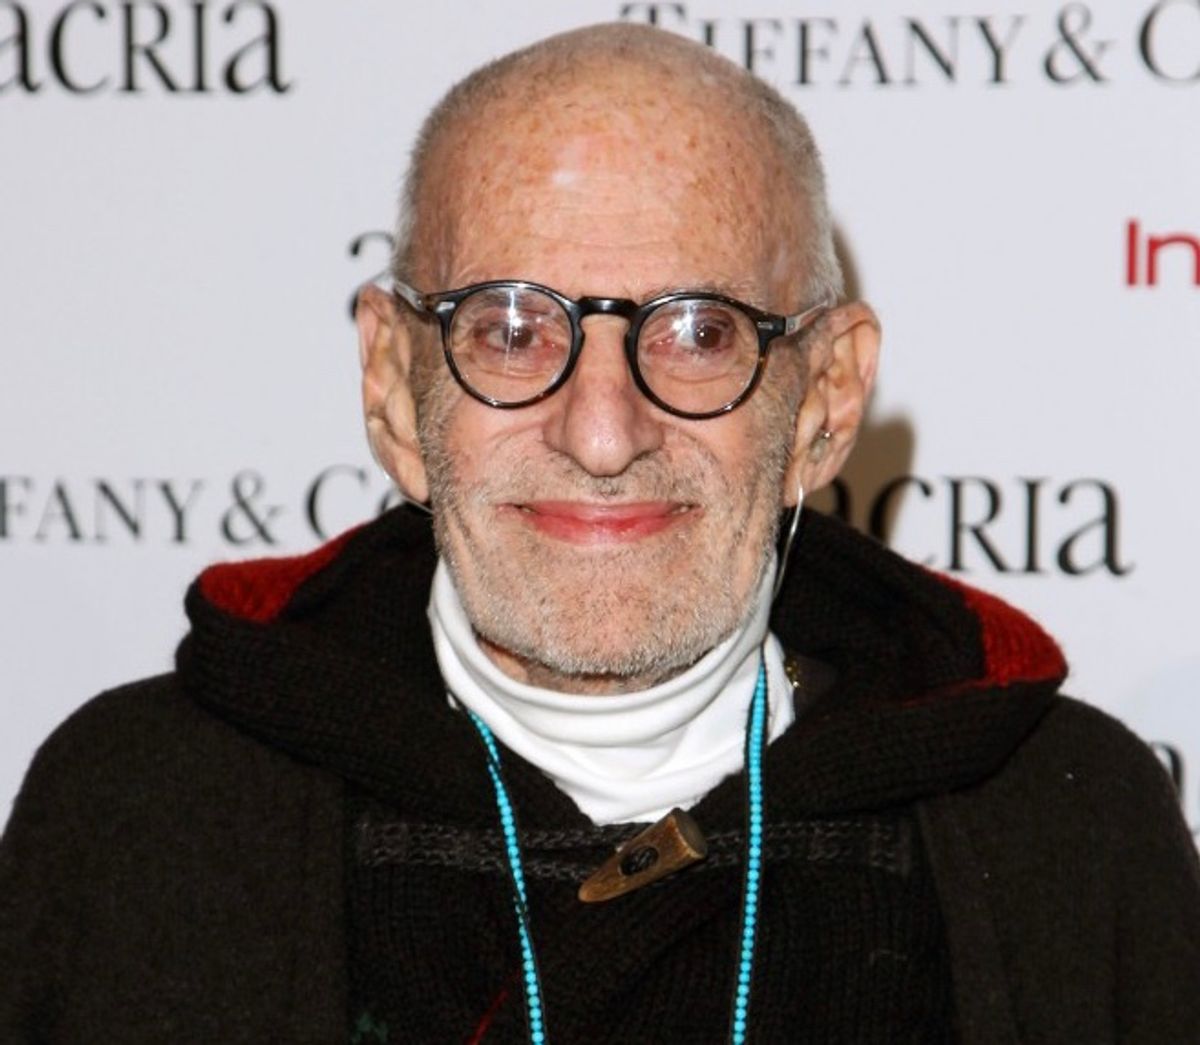 FILE - In this Dec. 10, 2014 file photo, playwright Larry Kramer attends Acria's 19th Annual Holiday Dinner Benefit in New York. Kramer, the playwright and AIDS activist turns 80 on Monday, June 29, 2015, and neither recent illness nor the glow of a new marriage has softened the urgency of his demands. His fiery temper, which roused thousands to protests in the early years of the epidemic, is part of a new HBO documentary, "Larry Kramer in Love &amp; Anger" that offers an intimate look at the crusader. (Photo by Donald Traill/Invision/AP, File) (Donald Traill/Invision/AP)